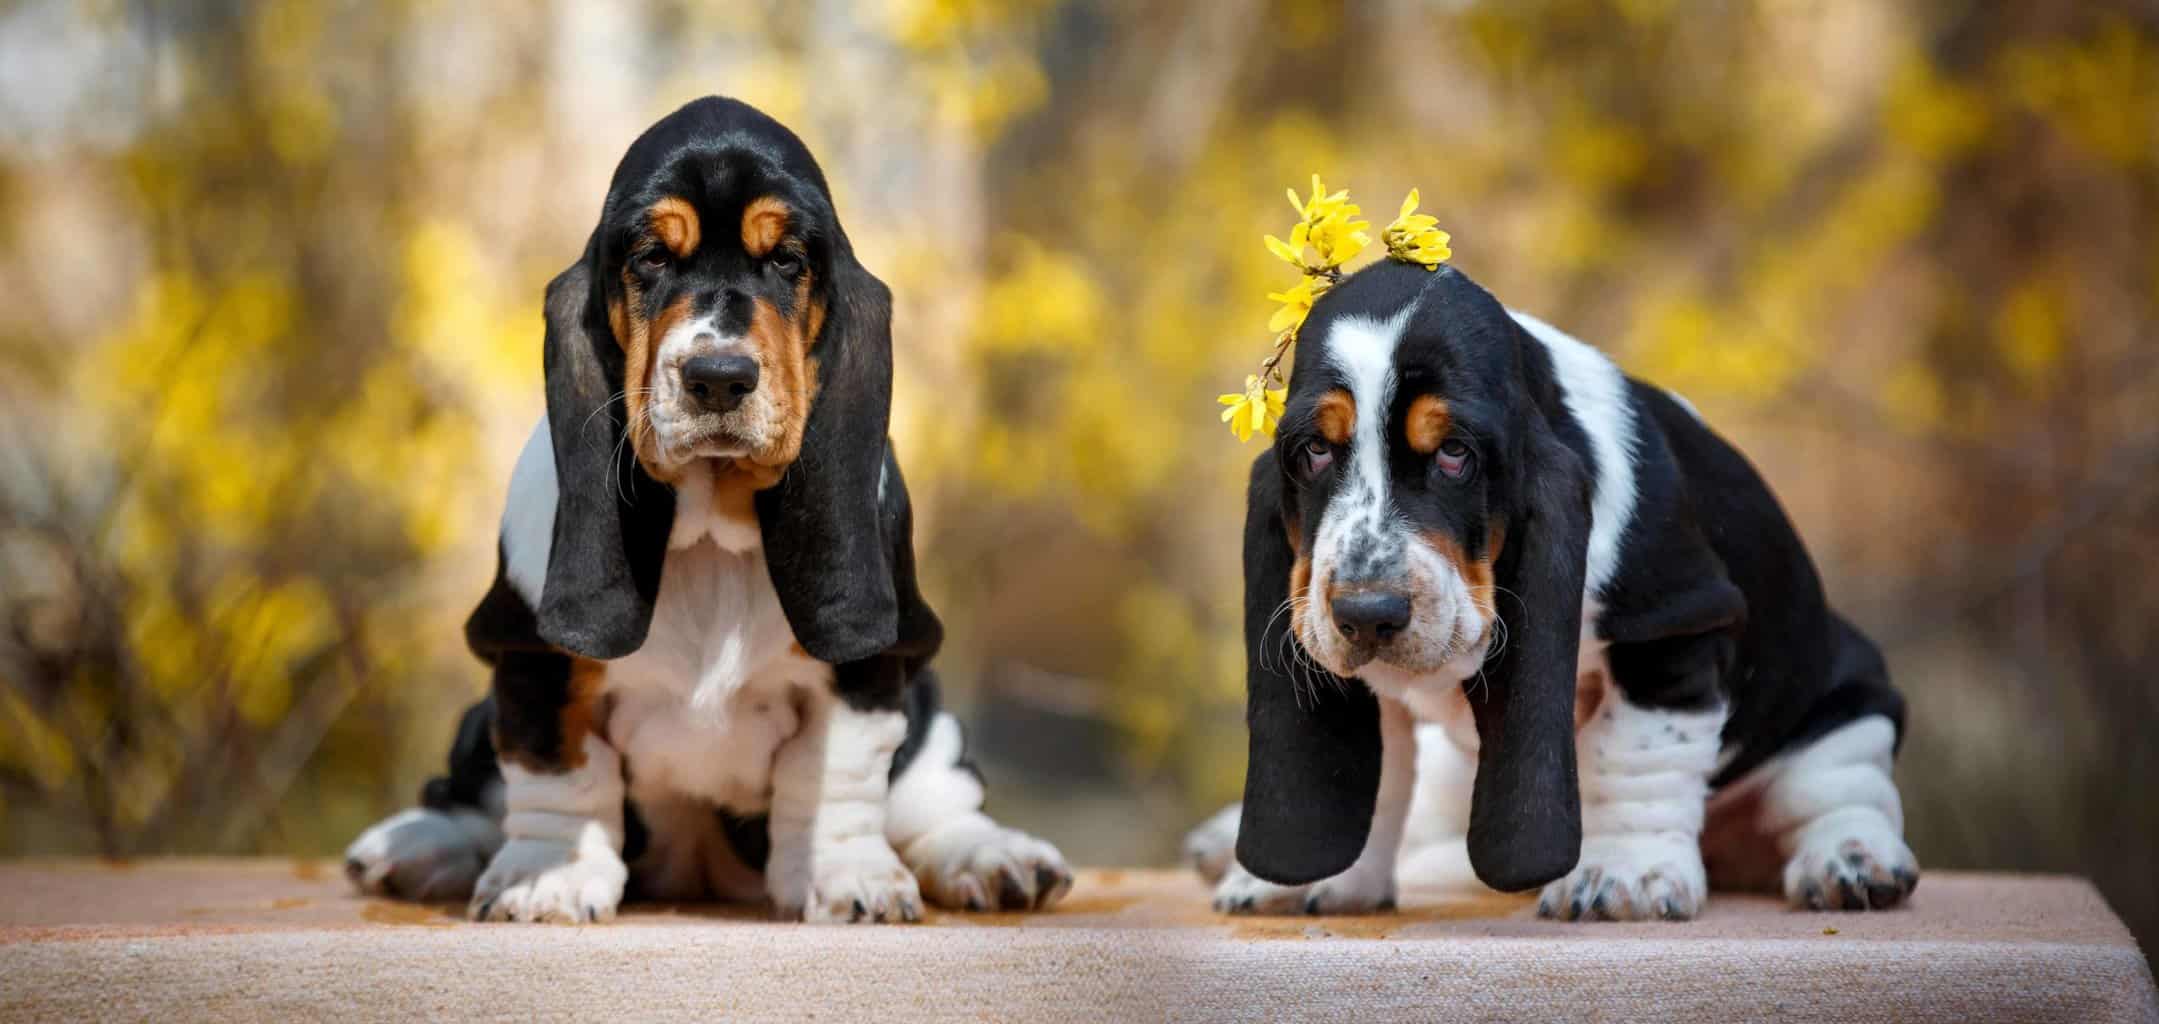 Pair of basset hounds. Lazy dog breeds need little exercise and like nothing more than sleeping and spending their day snuggled up with you on a couch.